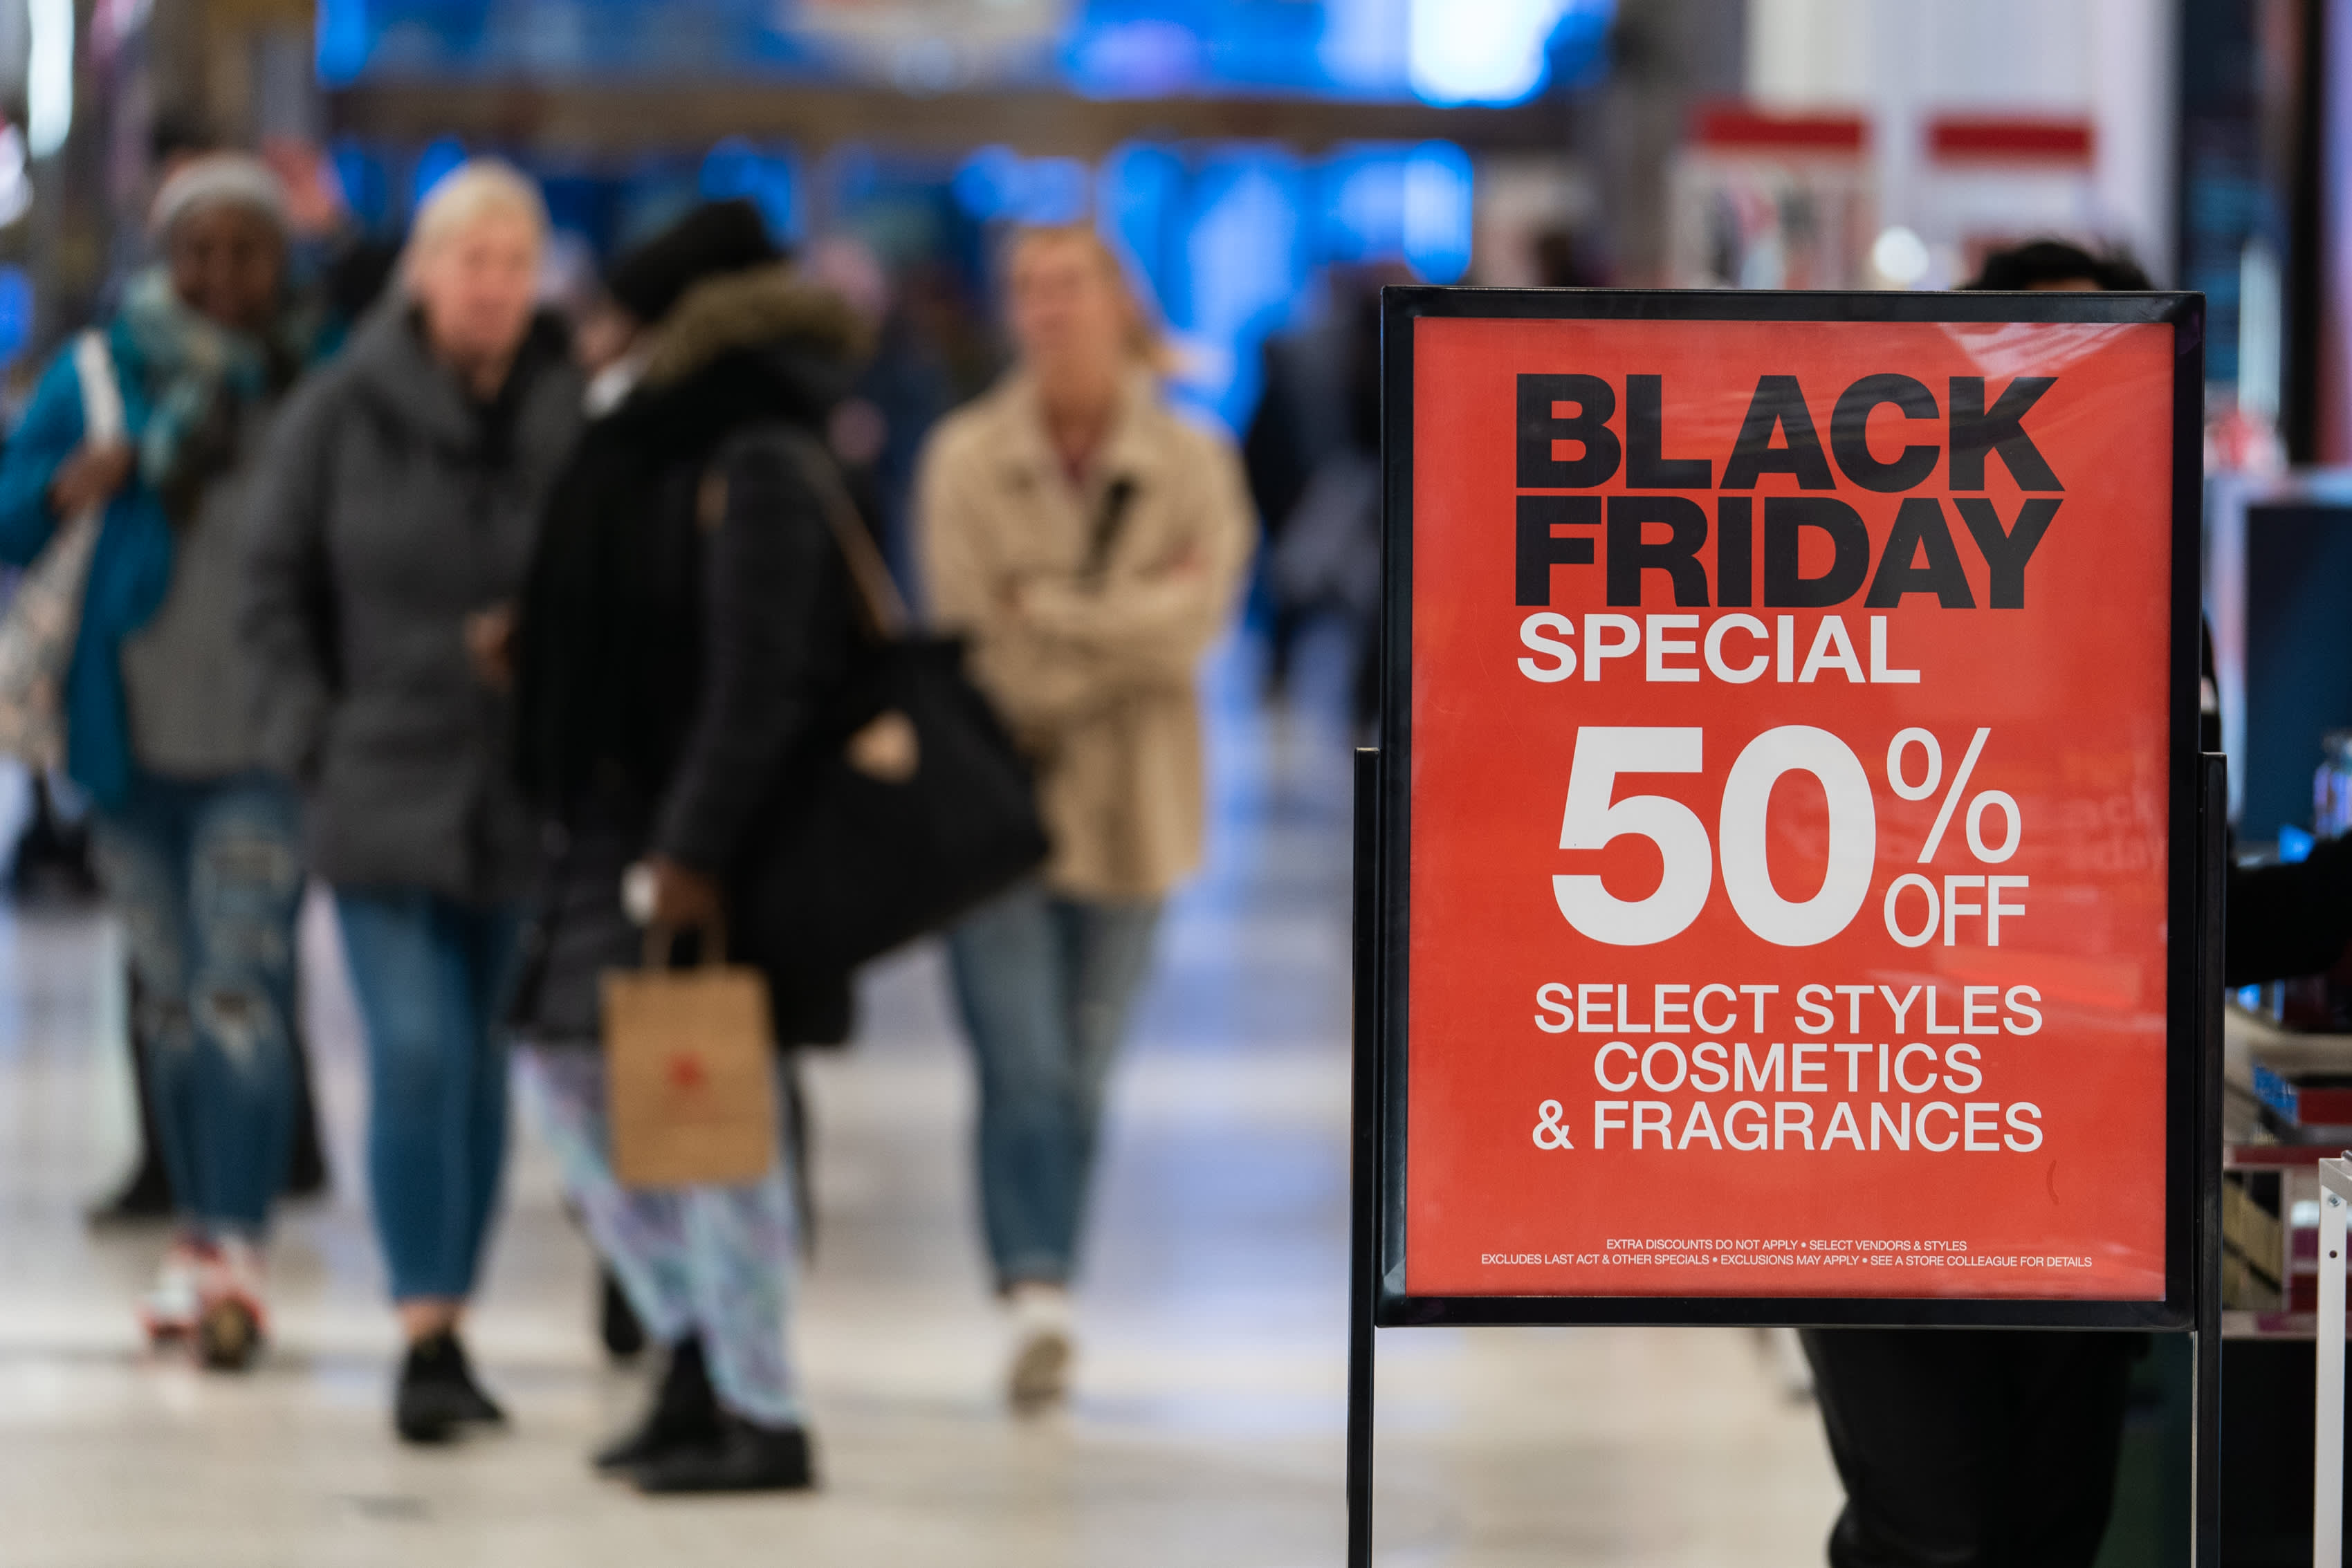 With endless Black Friday deals, are there actually any good deals